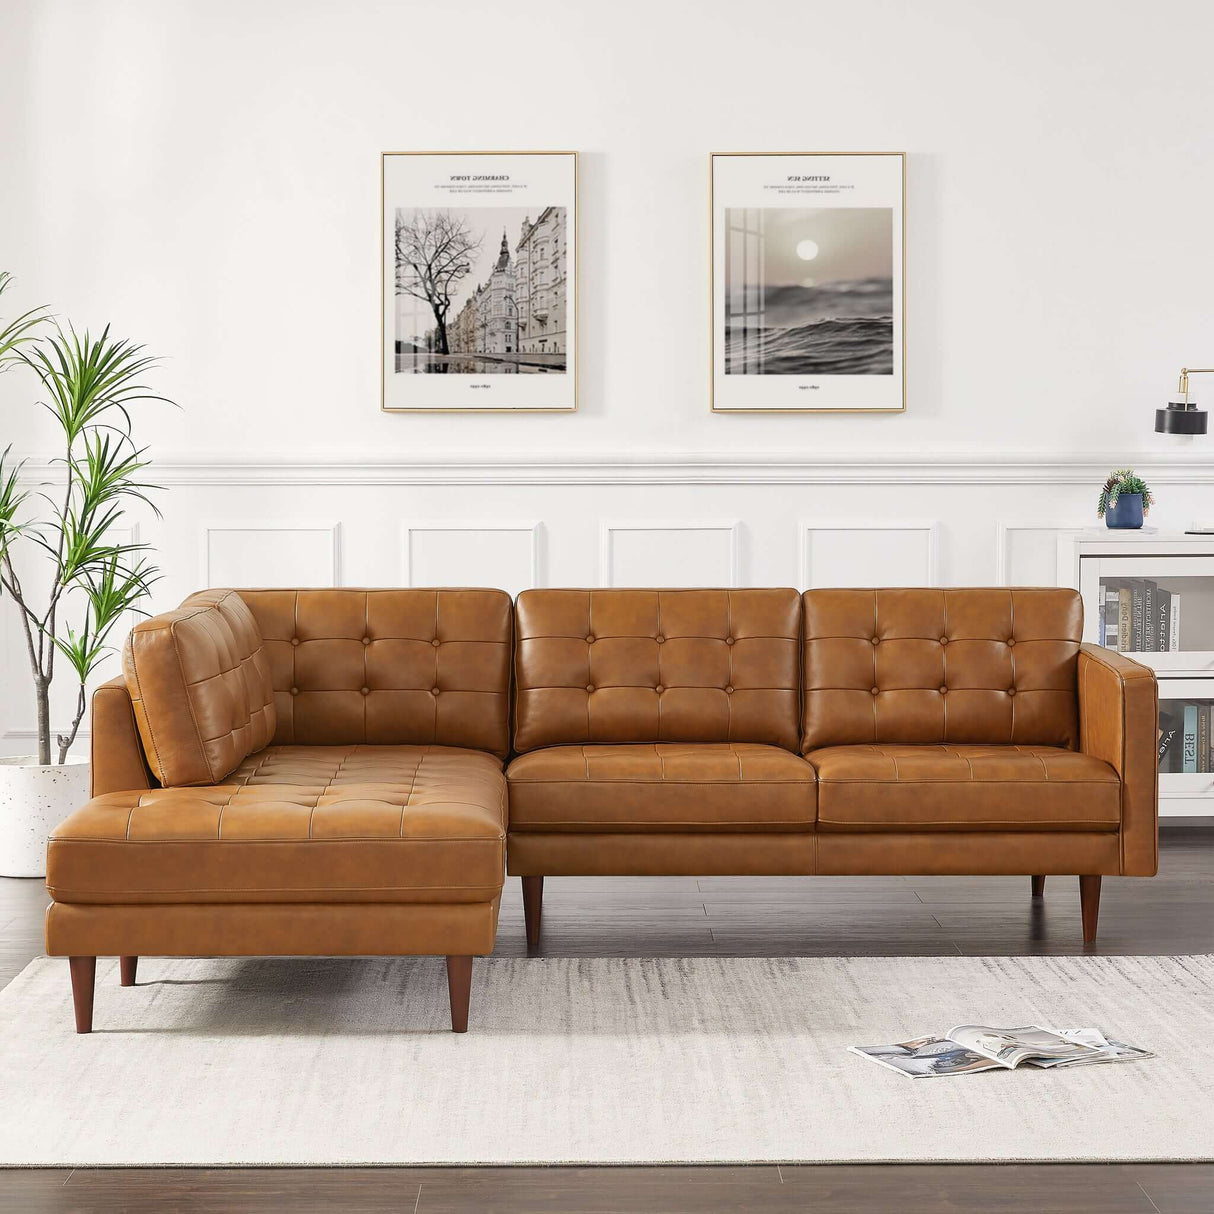 Lucco Mid-Century Modern L-Shaped Genuine Leather Sectional in Cognac Tan Left Sectional